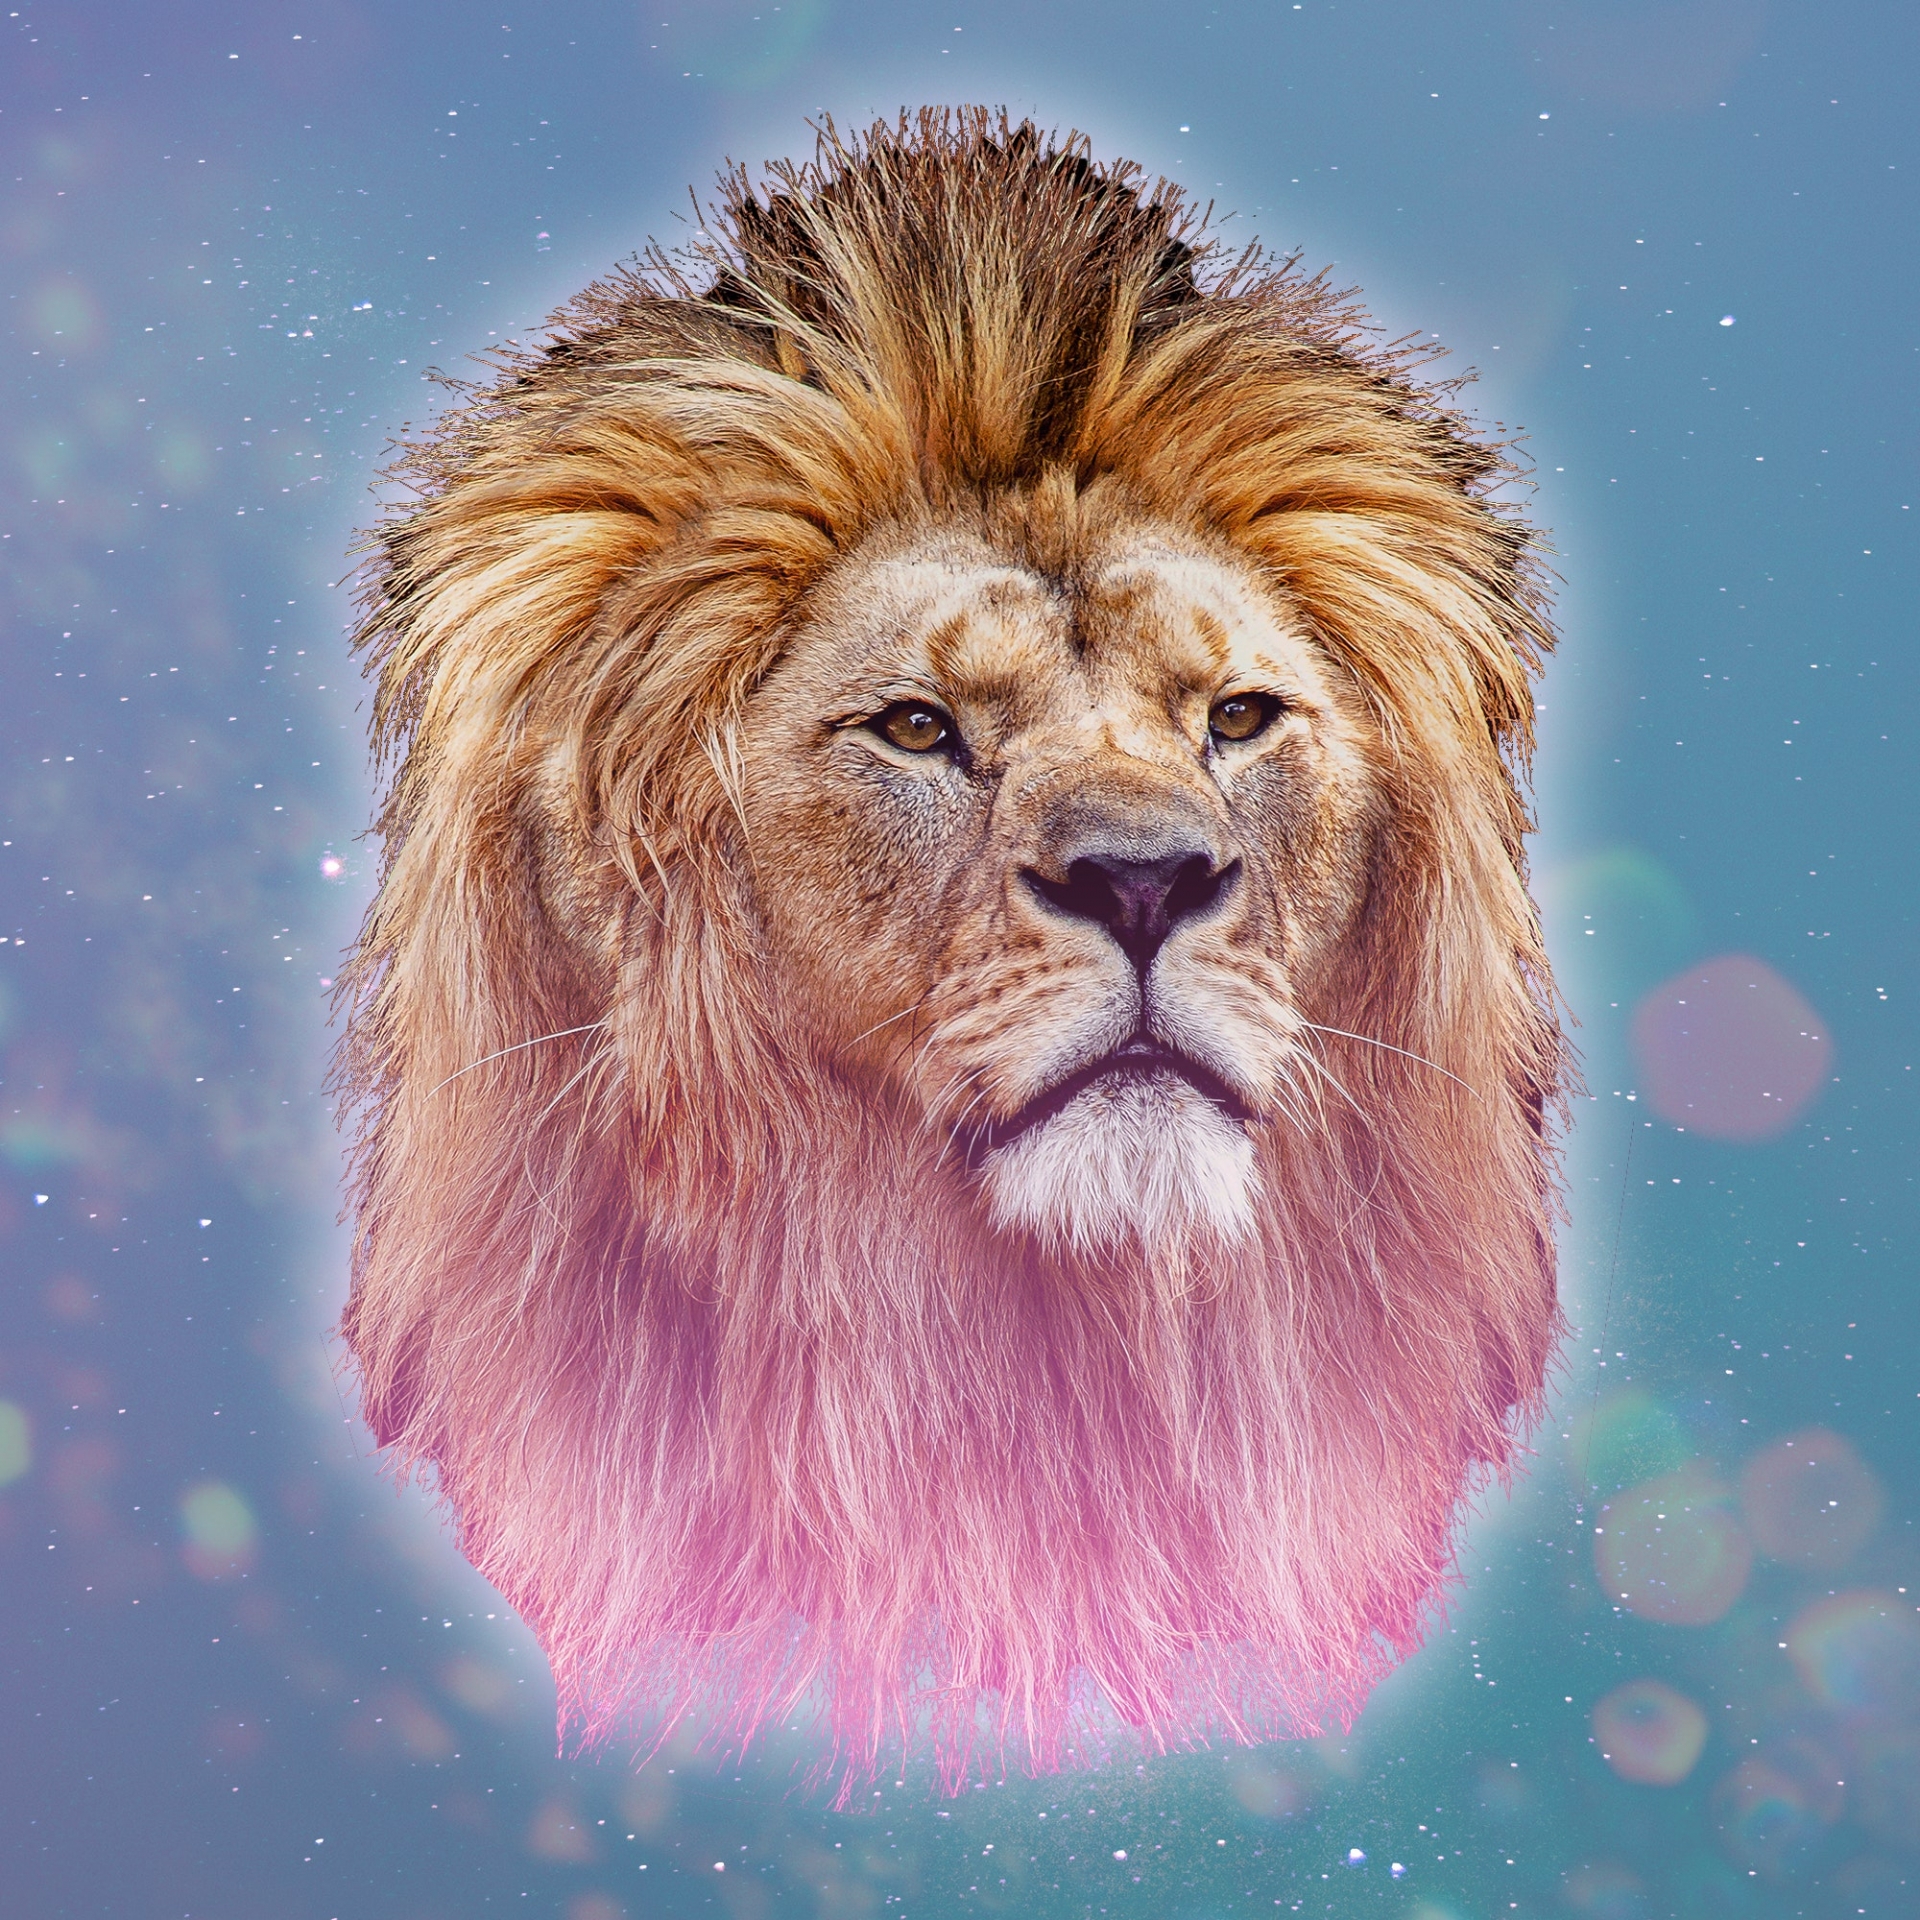 LEO Weekly Horoscope (April 5 - 11): Astrological Predictions for Love, Financial, Career and Health